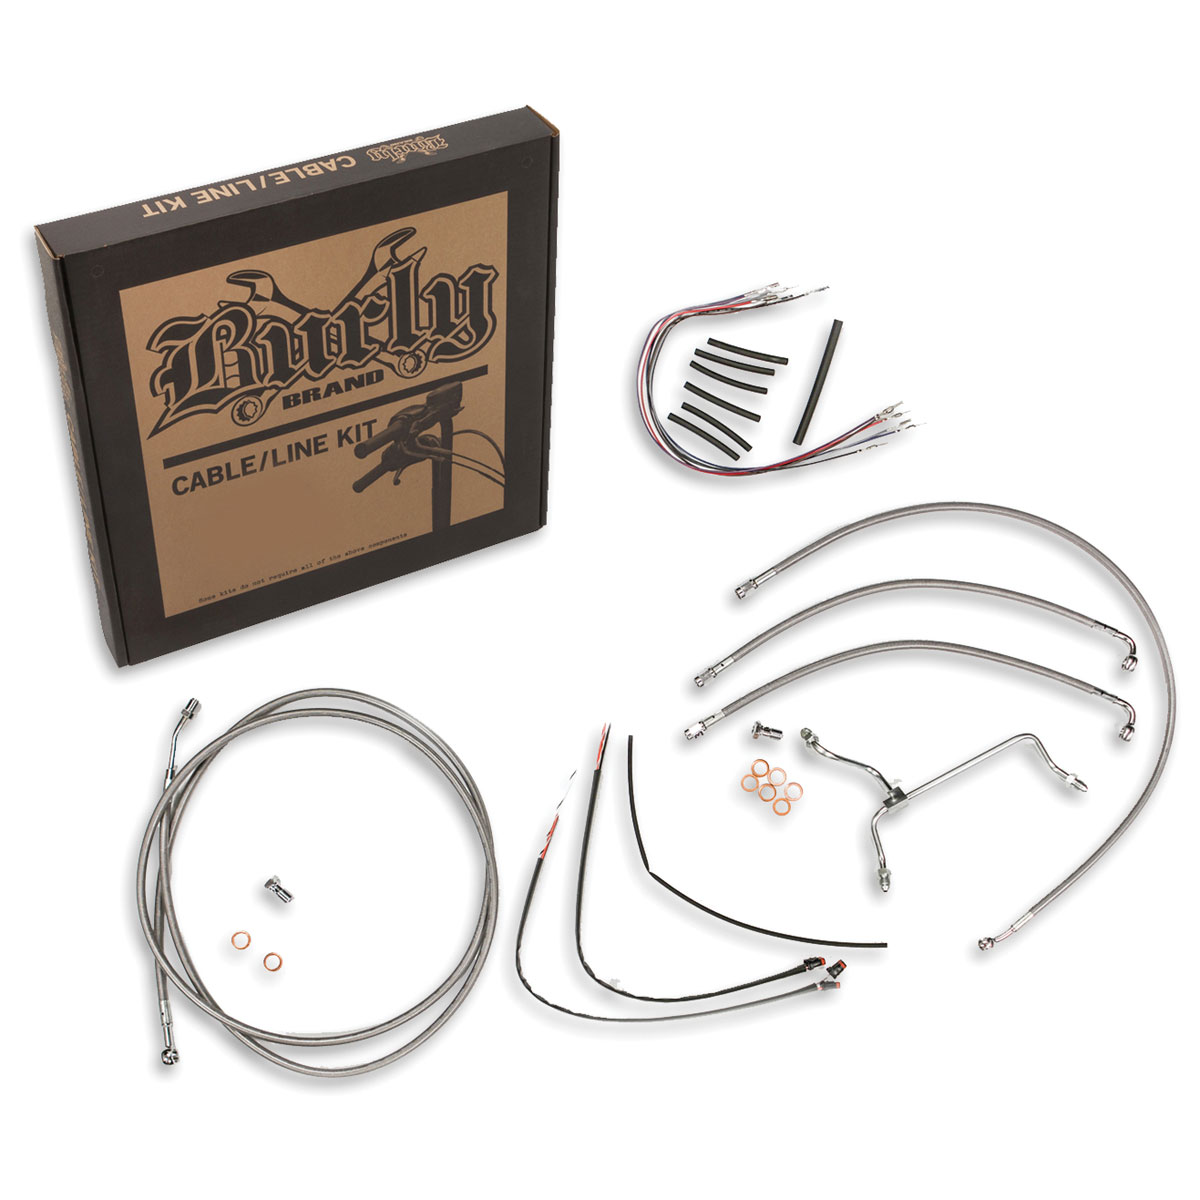 Burly Brand Stainless Steel 16" Ape Hanger Complete Cable Kit w/ ABS